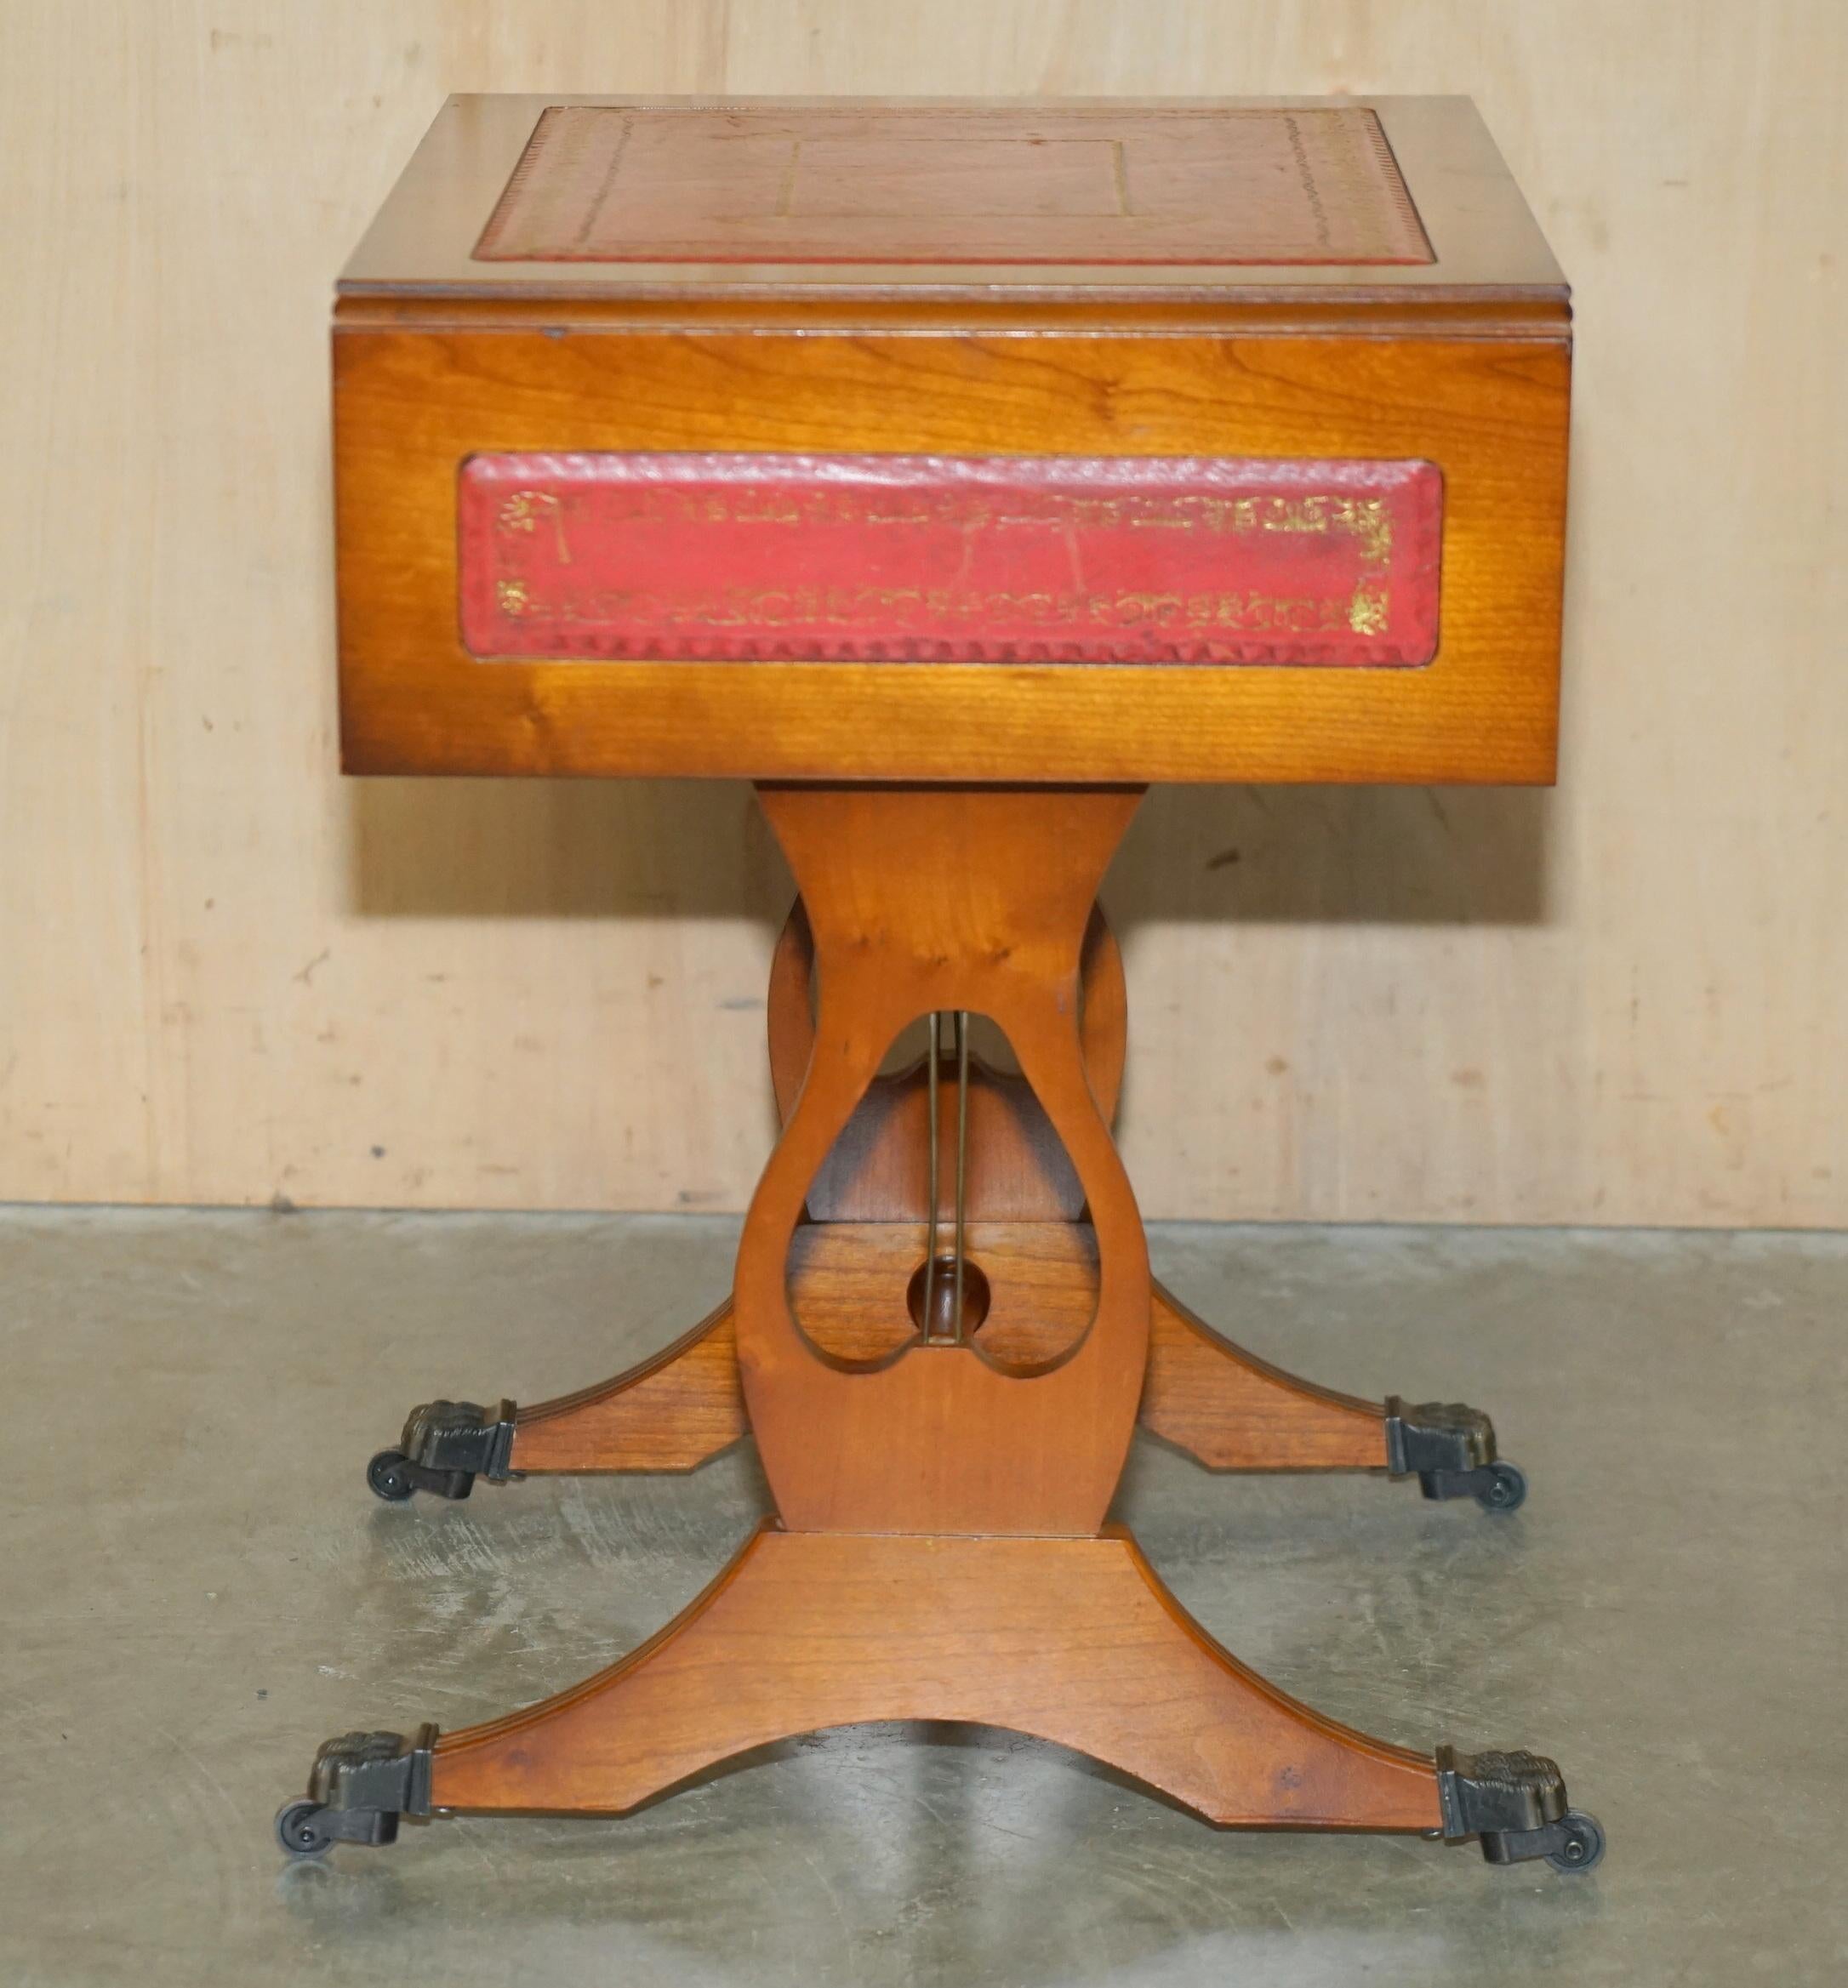 LOVELY ViNTAGE OXBLOOD LEATHER EXTENDING SIDE TABLE WITH GOLD LEAF INLAY For Sale 7